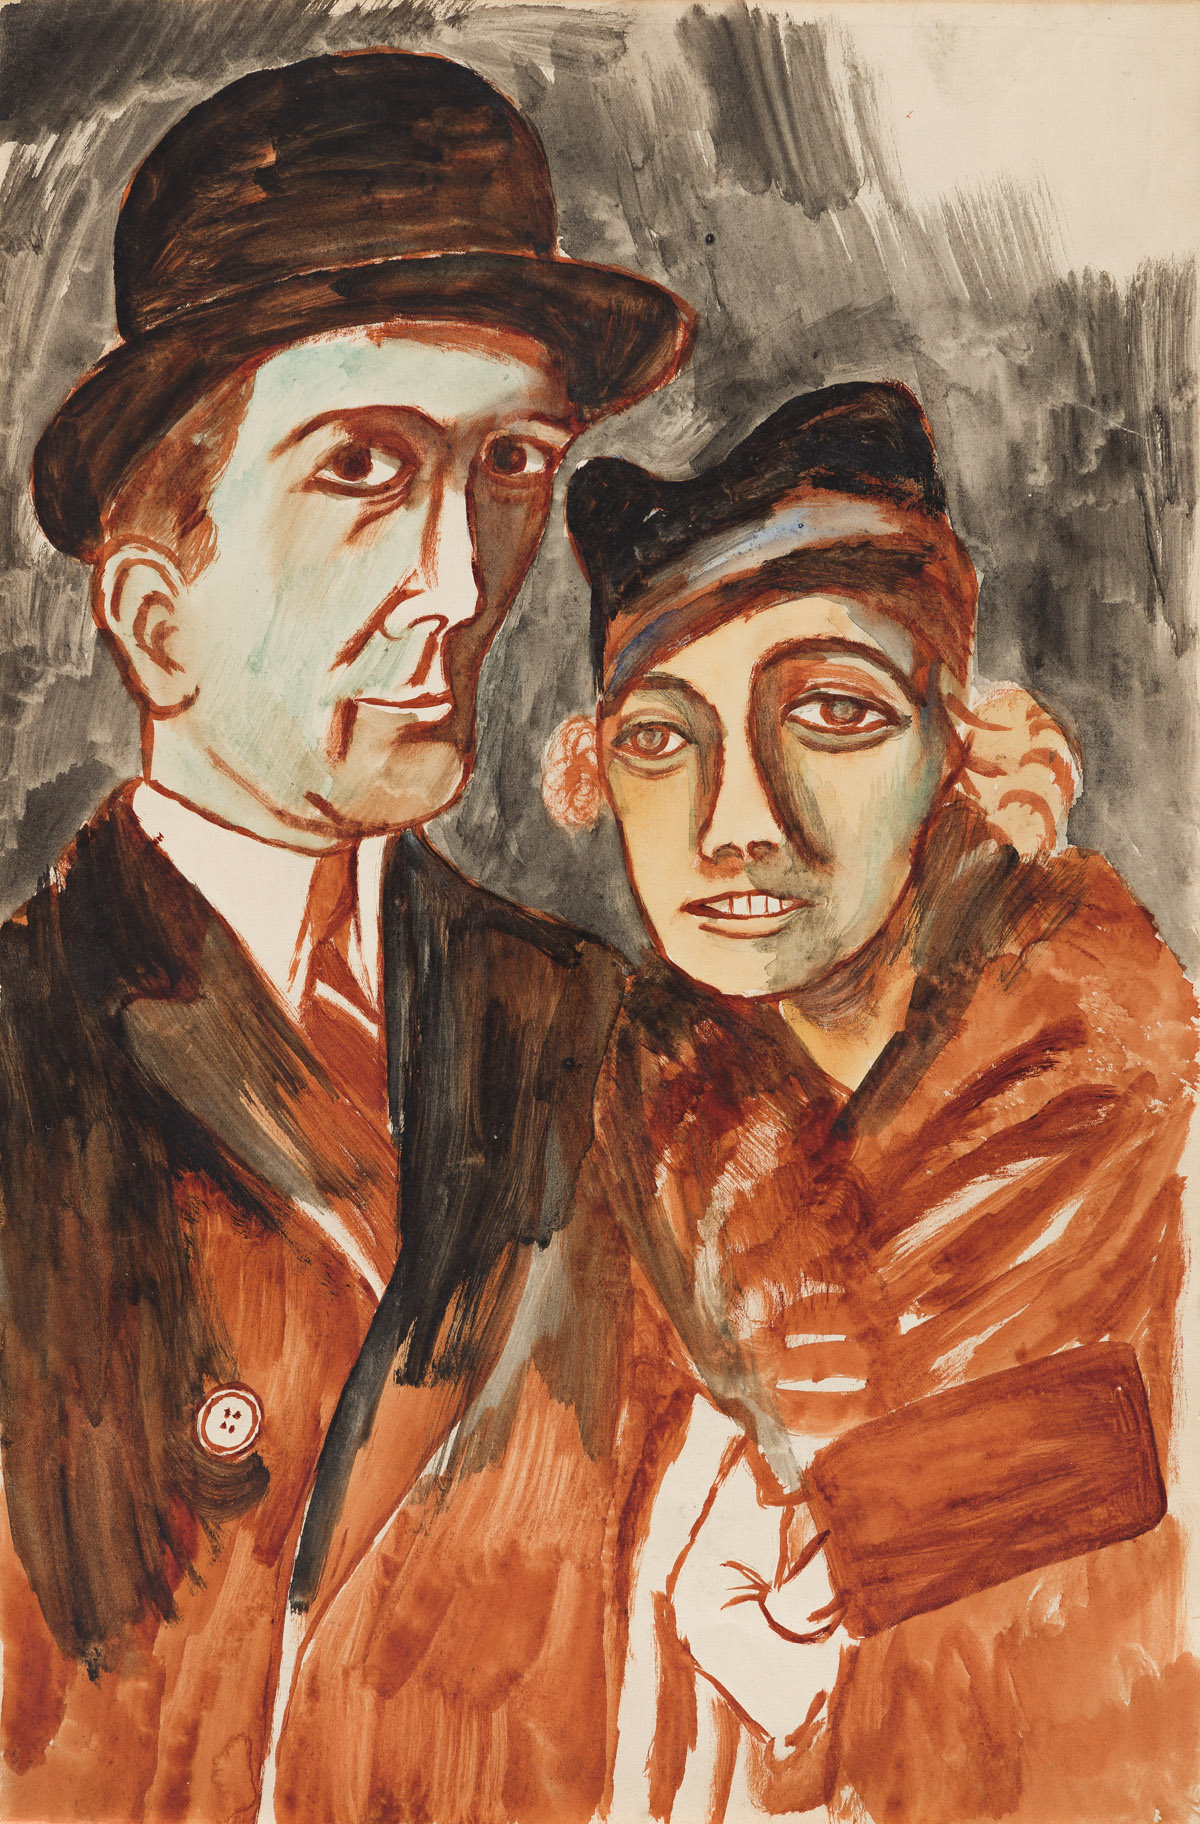 BEN SHAHN (1898-1969) Study of Man and Woman in Hats.